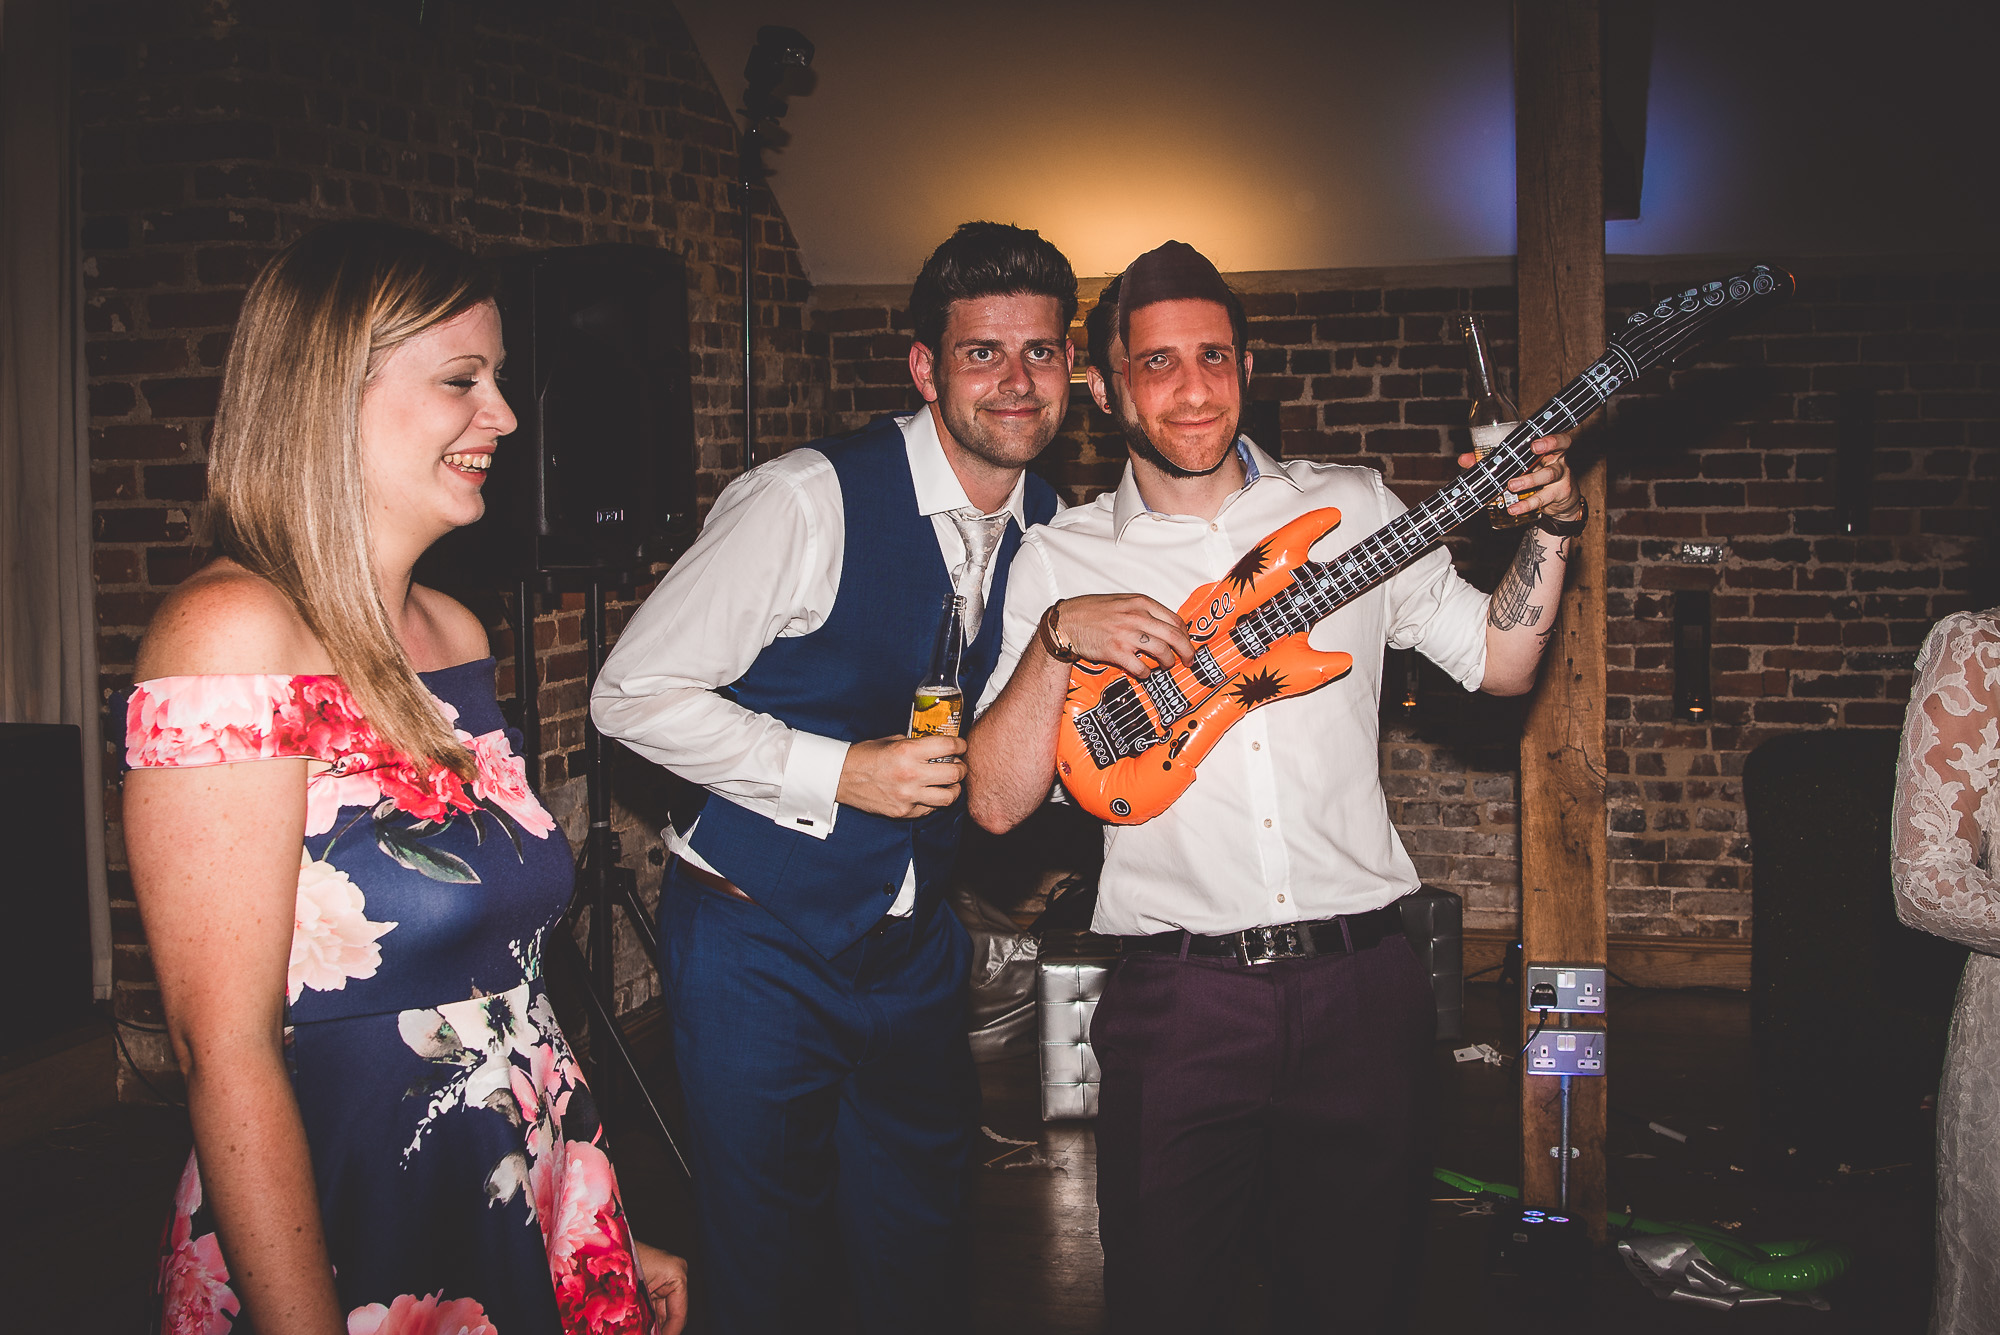 A group of people including the groom and bride holding a guitar at their wedding reception.